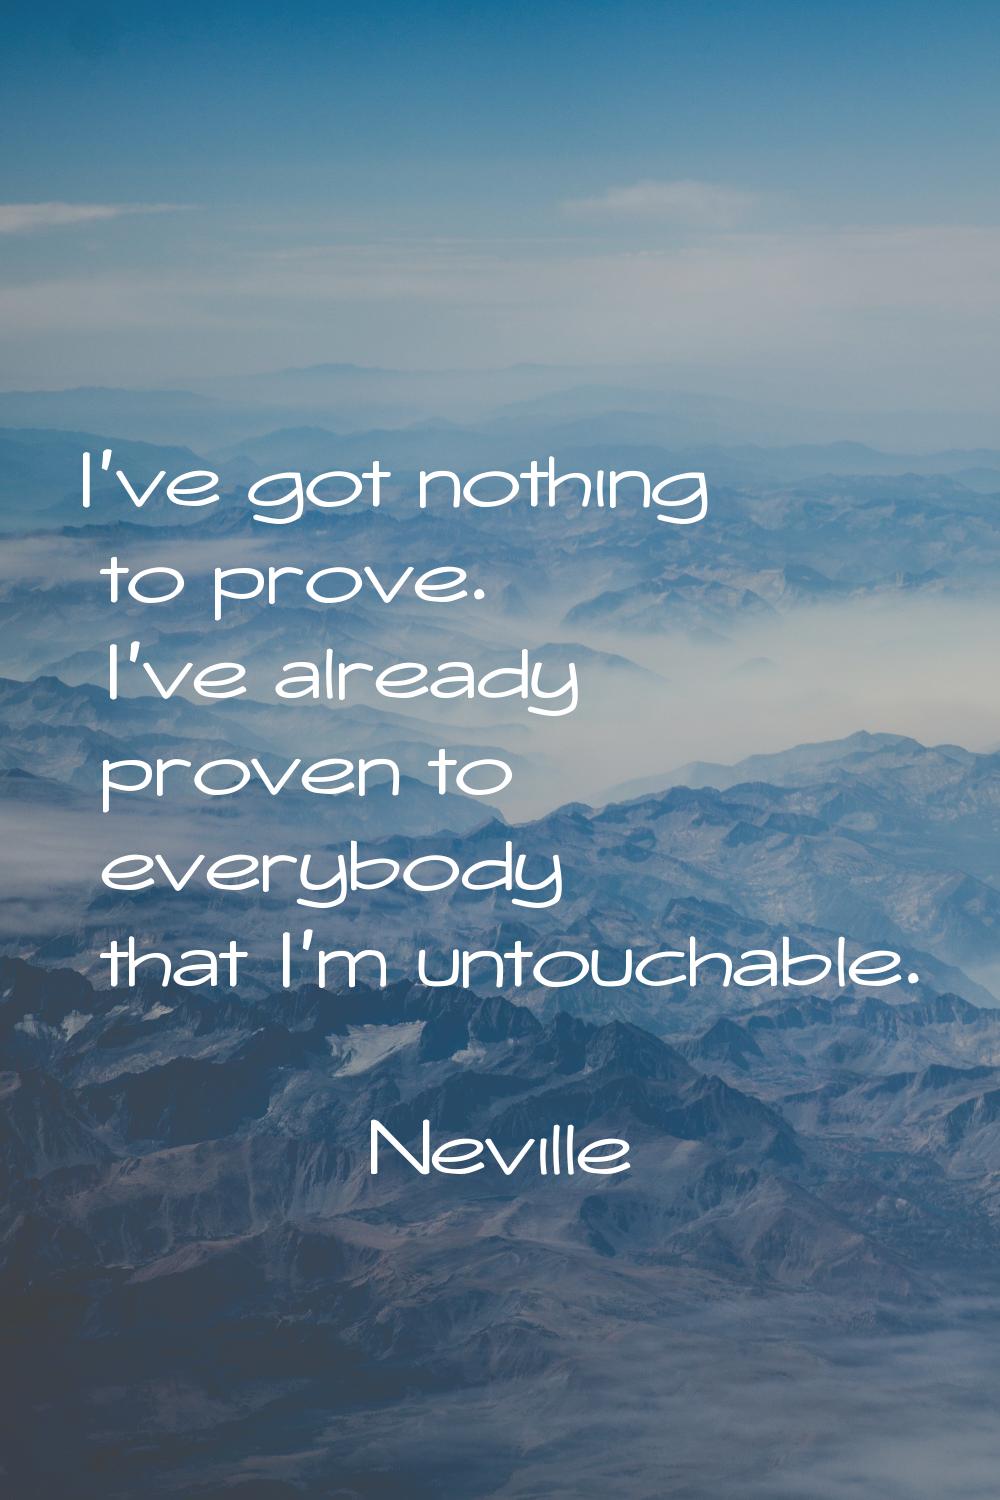 I've got nothing to prove. I've already proven to everybody that I'm untouchable.